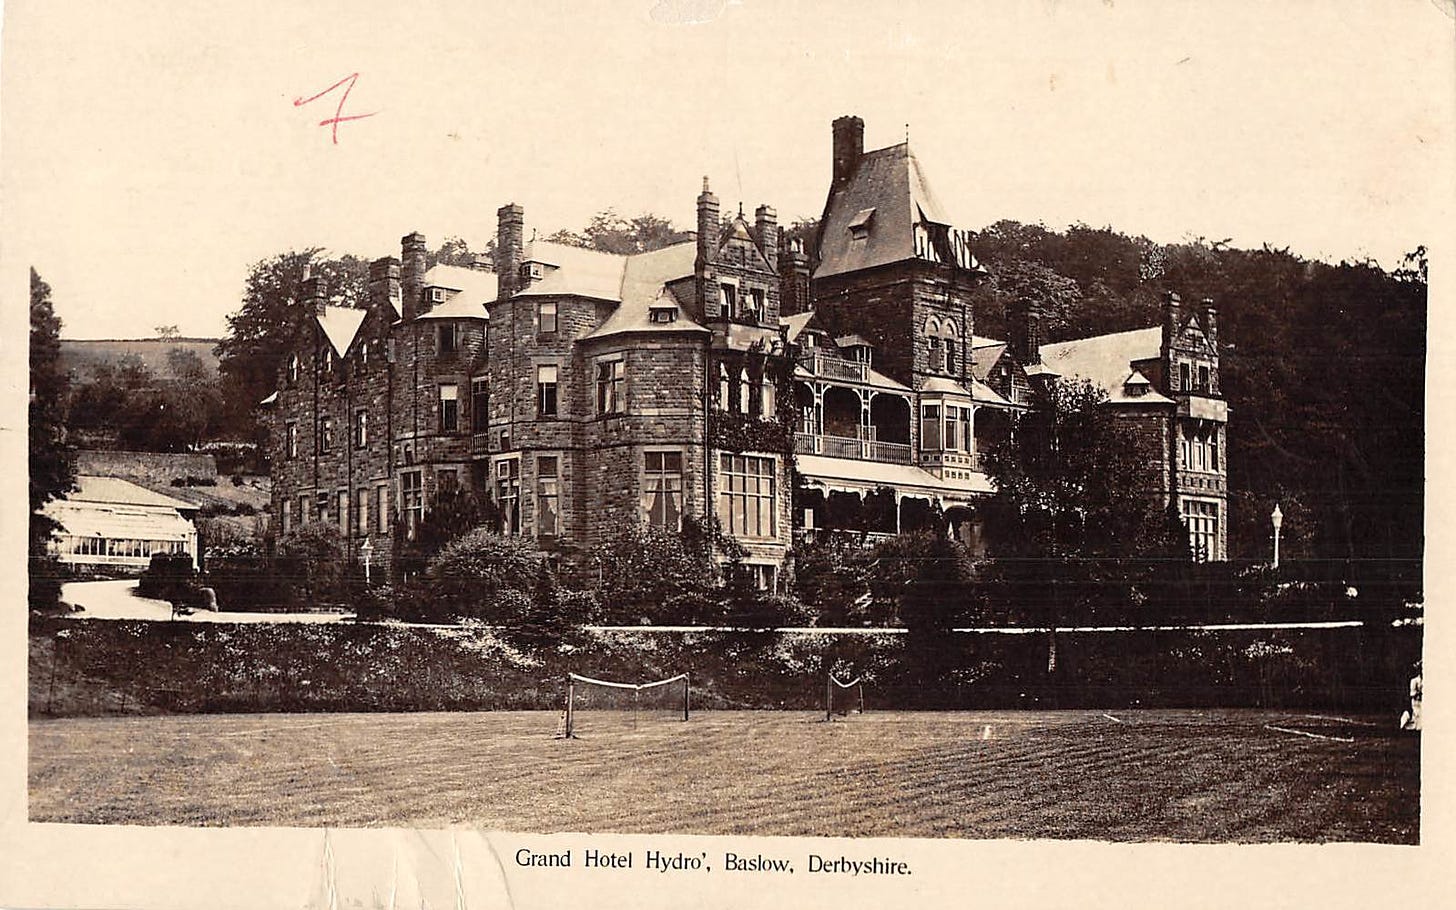 The Grand Hotel Hydro, Baslow, Chesterfield on an old postcard.